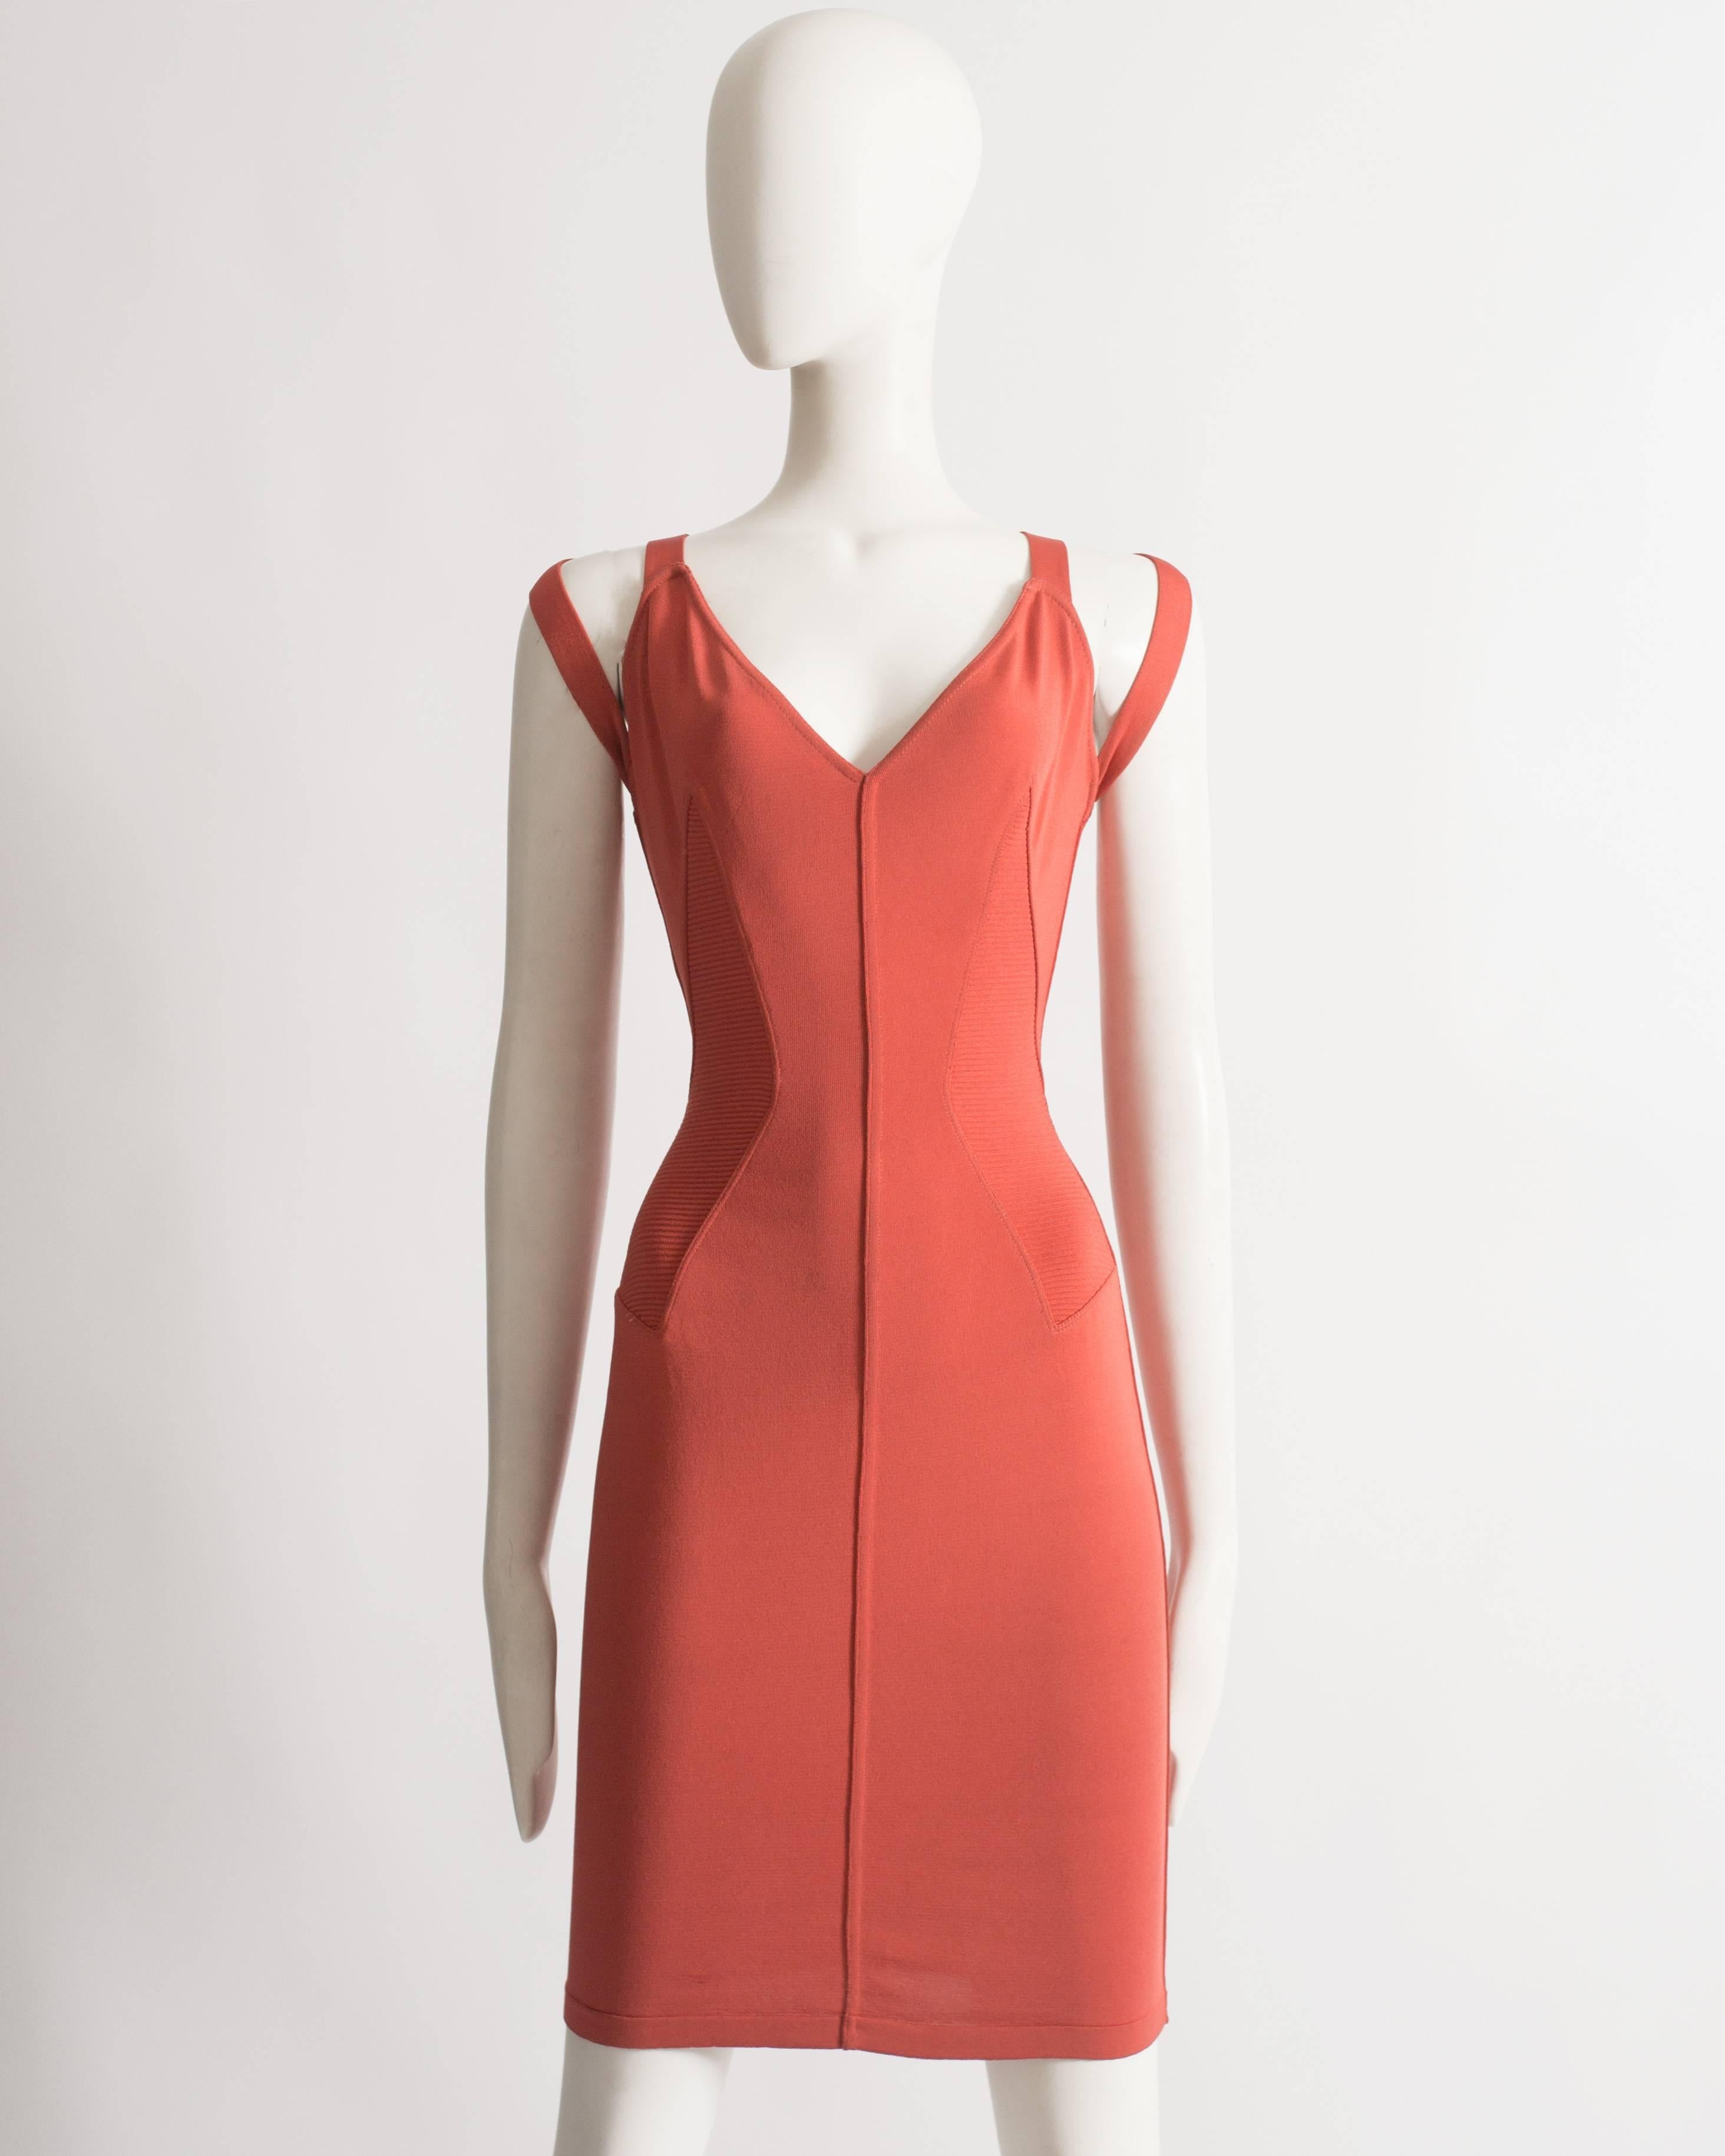 Alaia coral spandex evening dress with bondage straps and ribbed panels.

Spring-Summer 1990